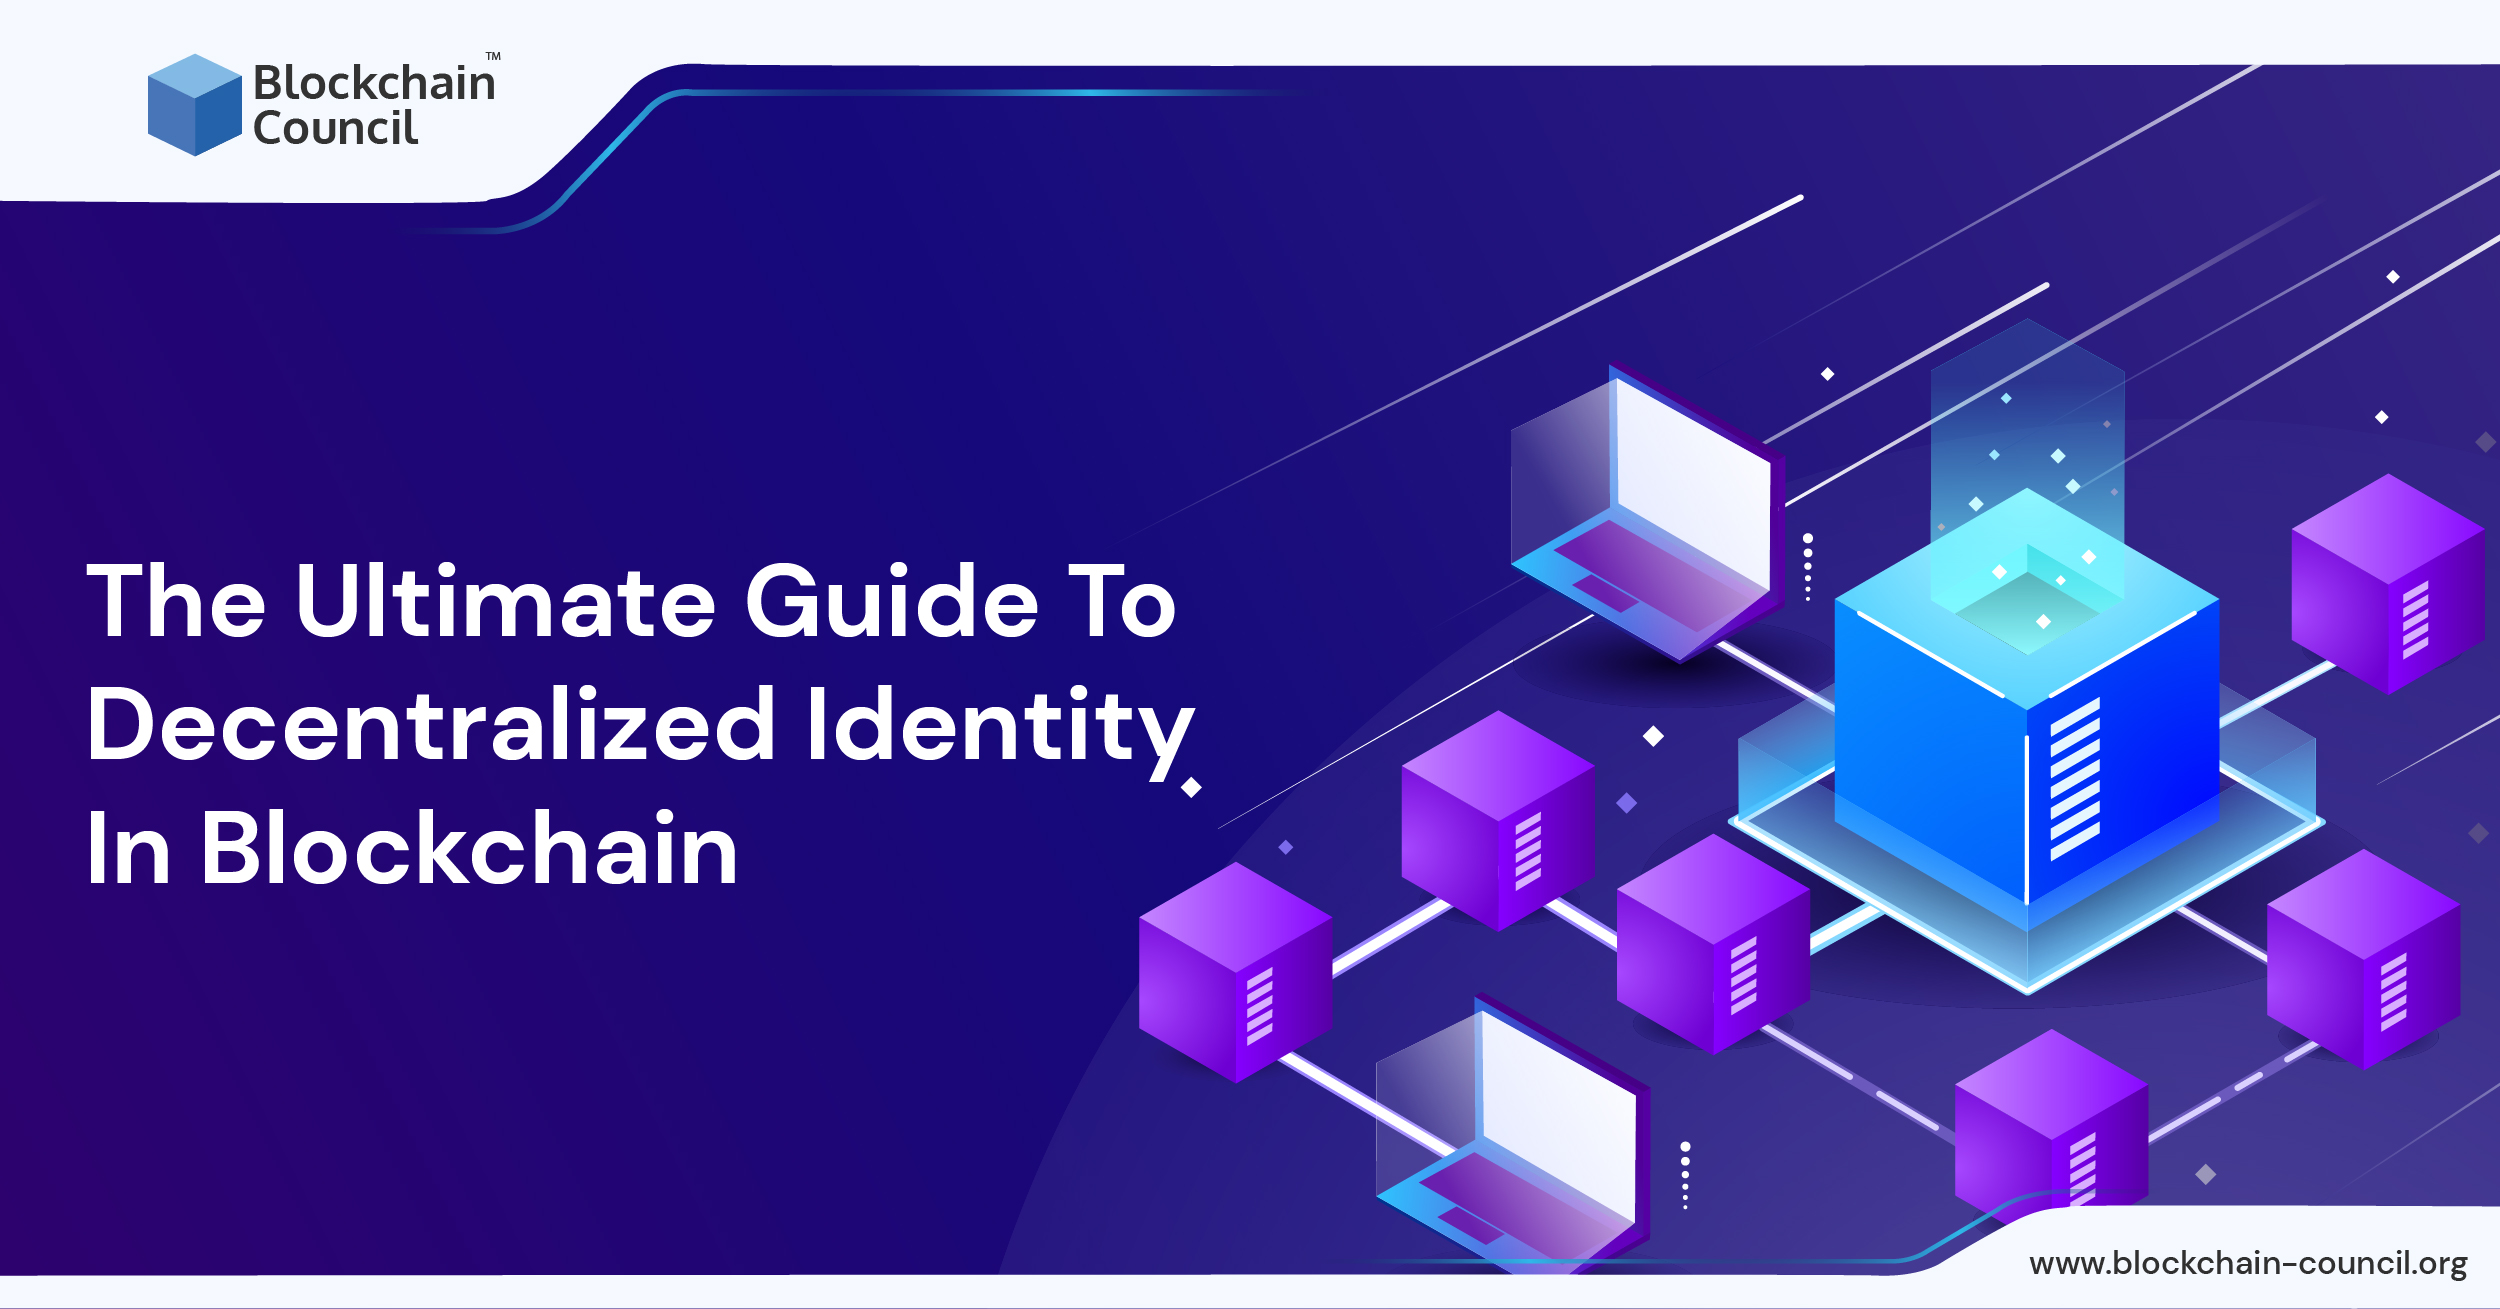 The Ultimate Guide To Decentralized Identity In Blockchain